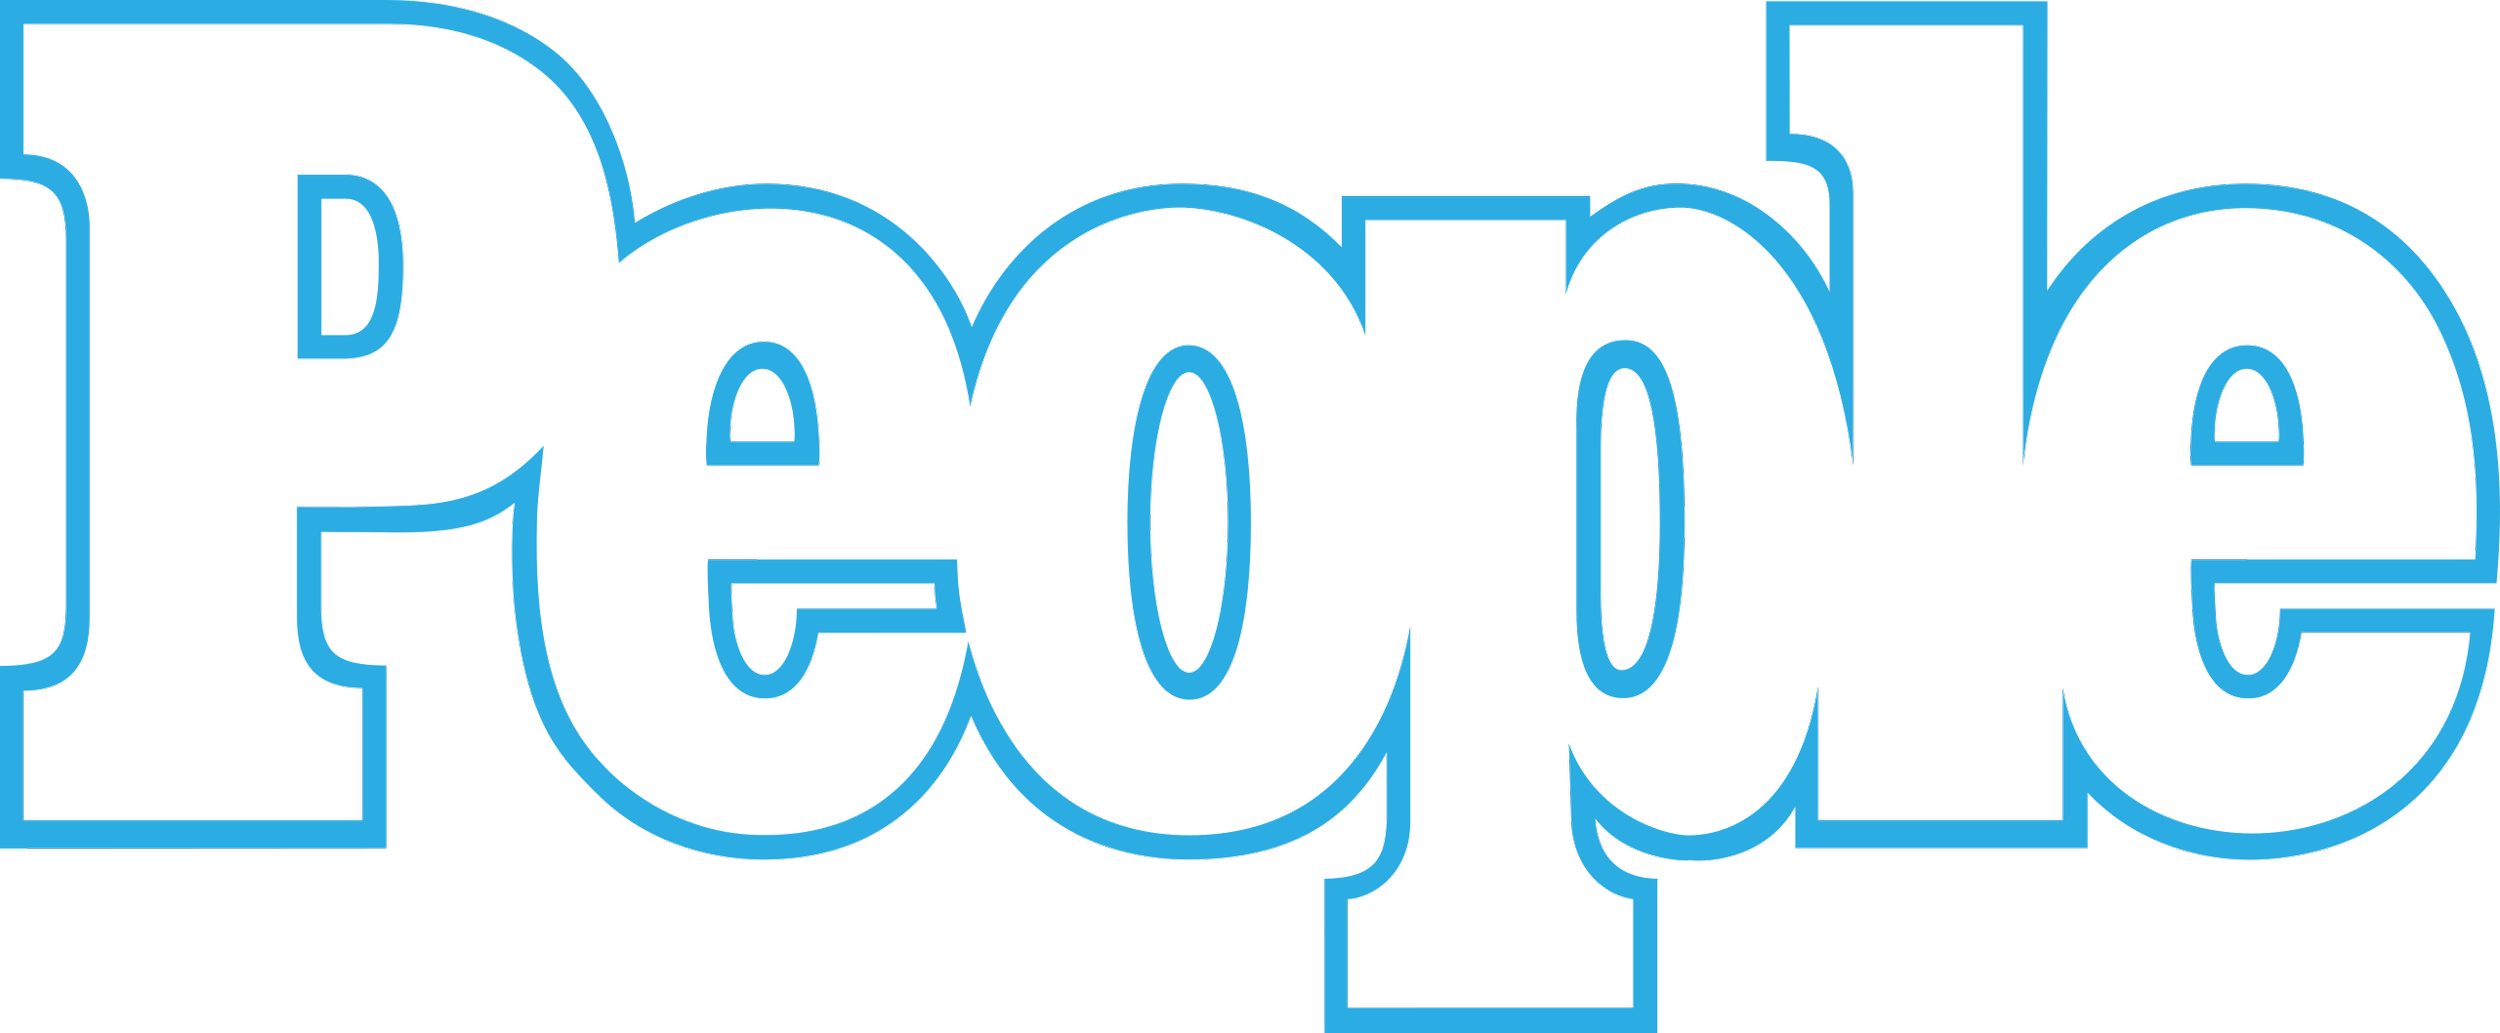 Coleman Intellect - People Magazine Logo.png